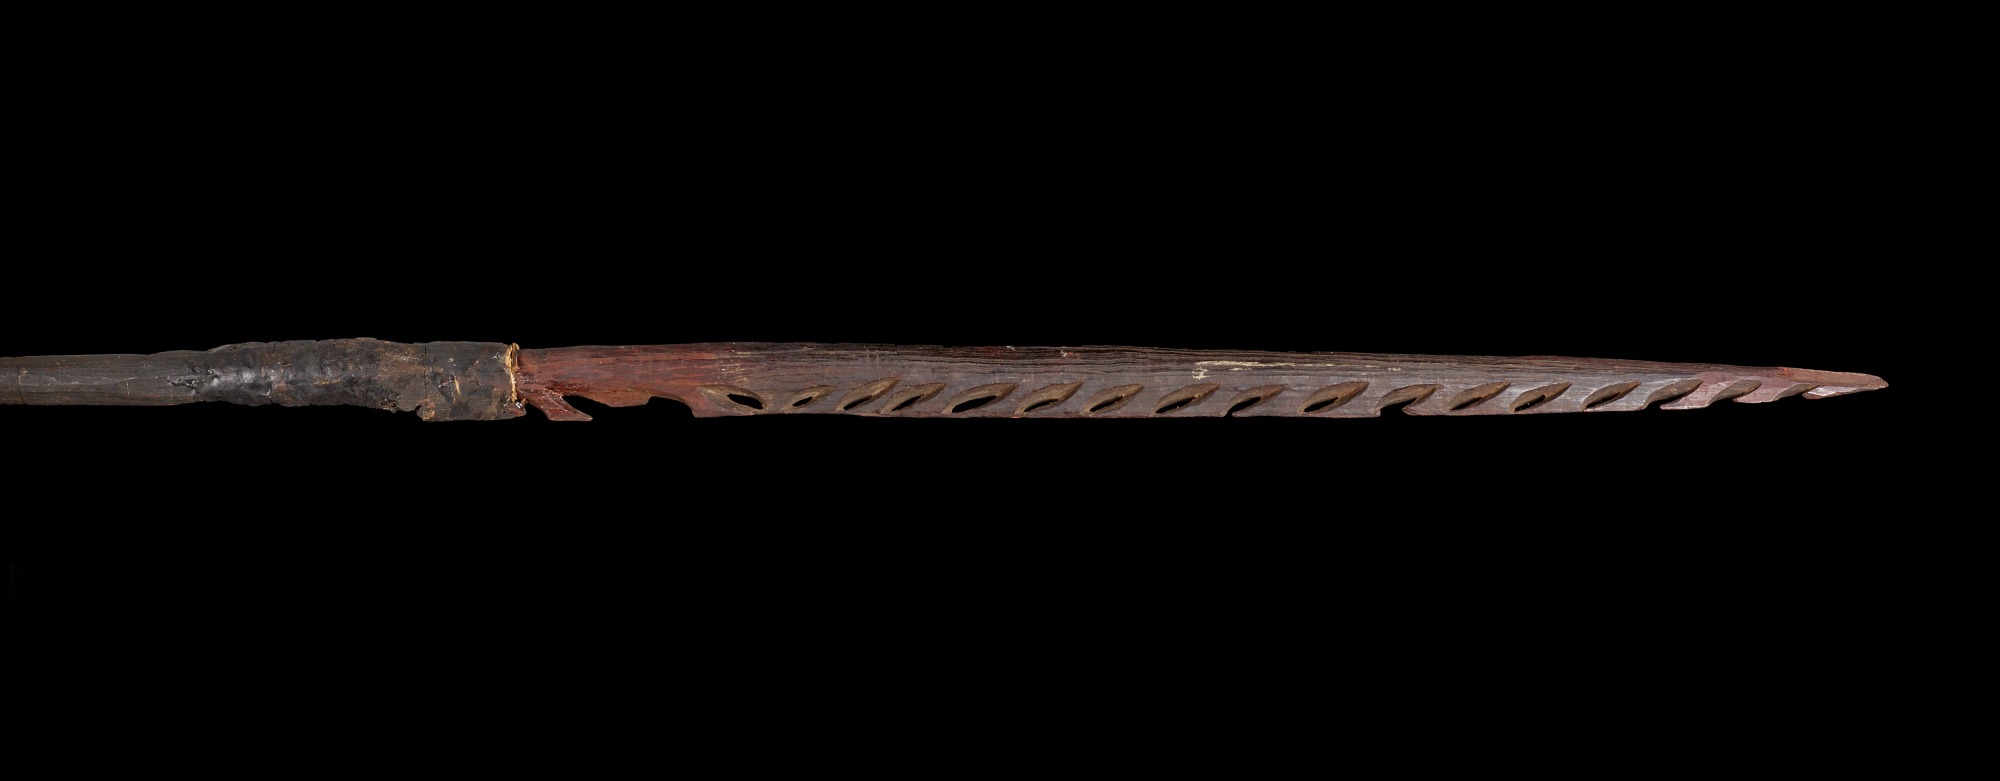 Ceremonial spear made by the Yolngu people, collected from Makassar in 1879